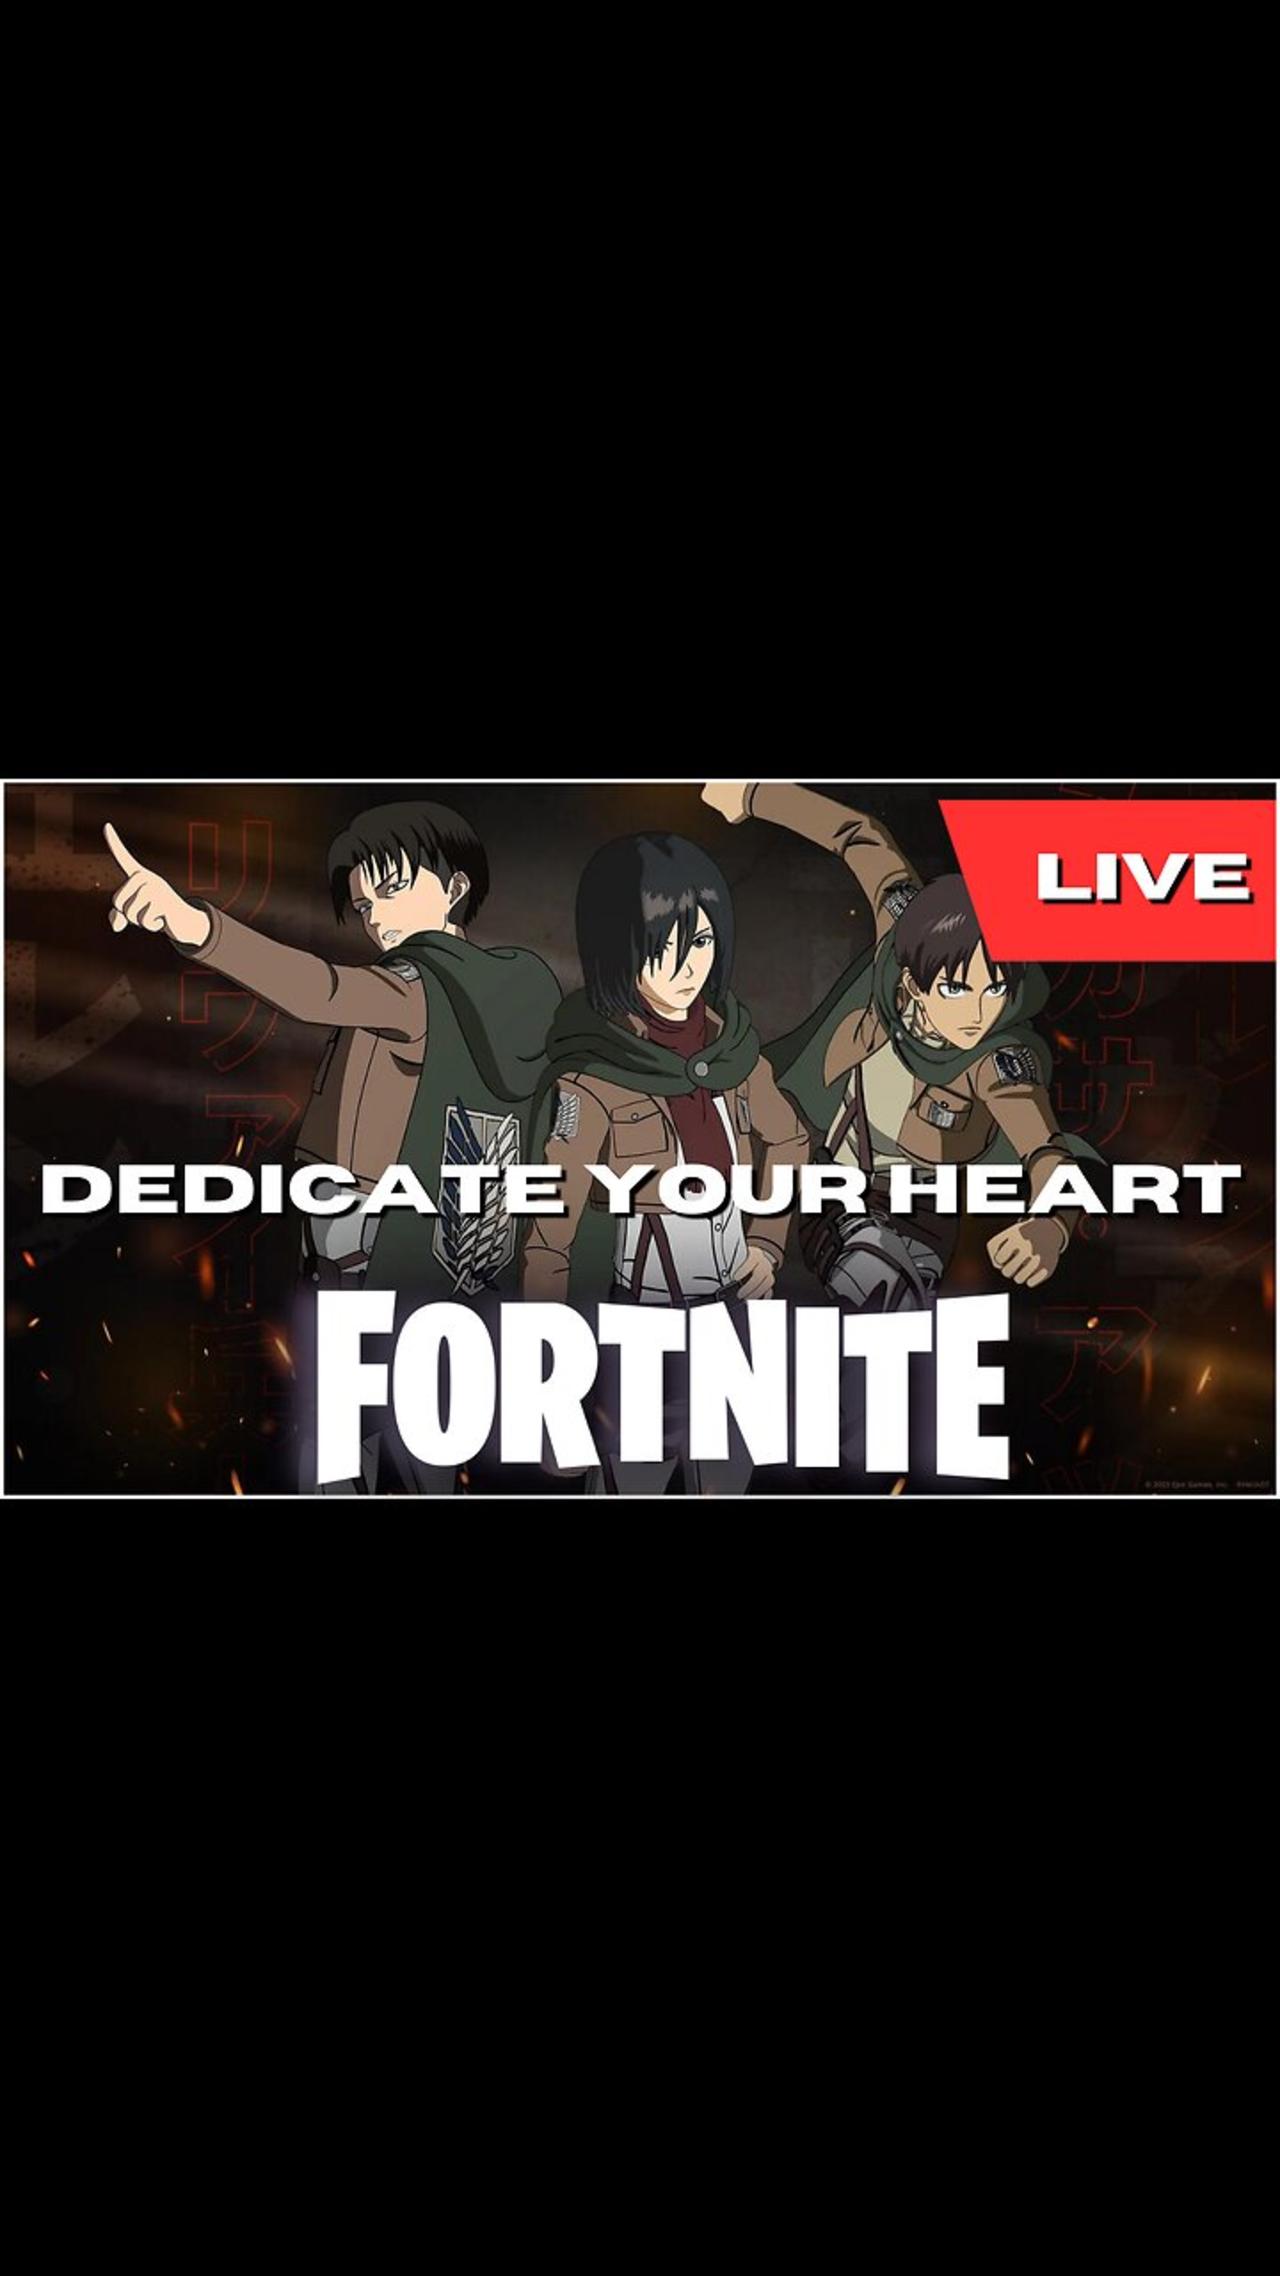 ATTACK ON TITAN X FORTNITE COLLAB?? DEDICATE YOUR HEART